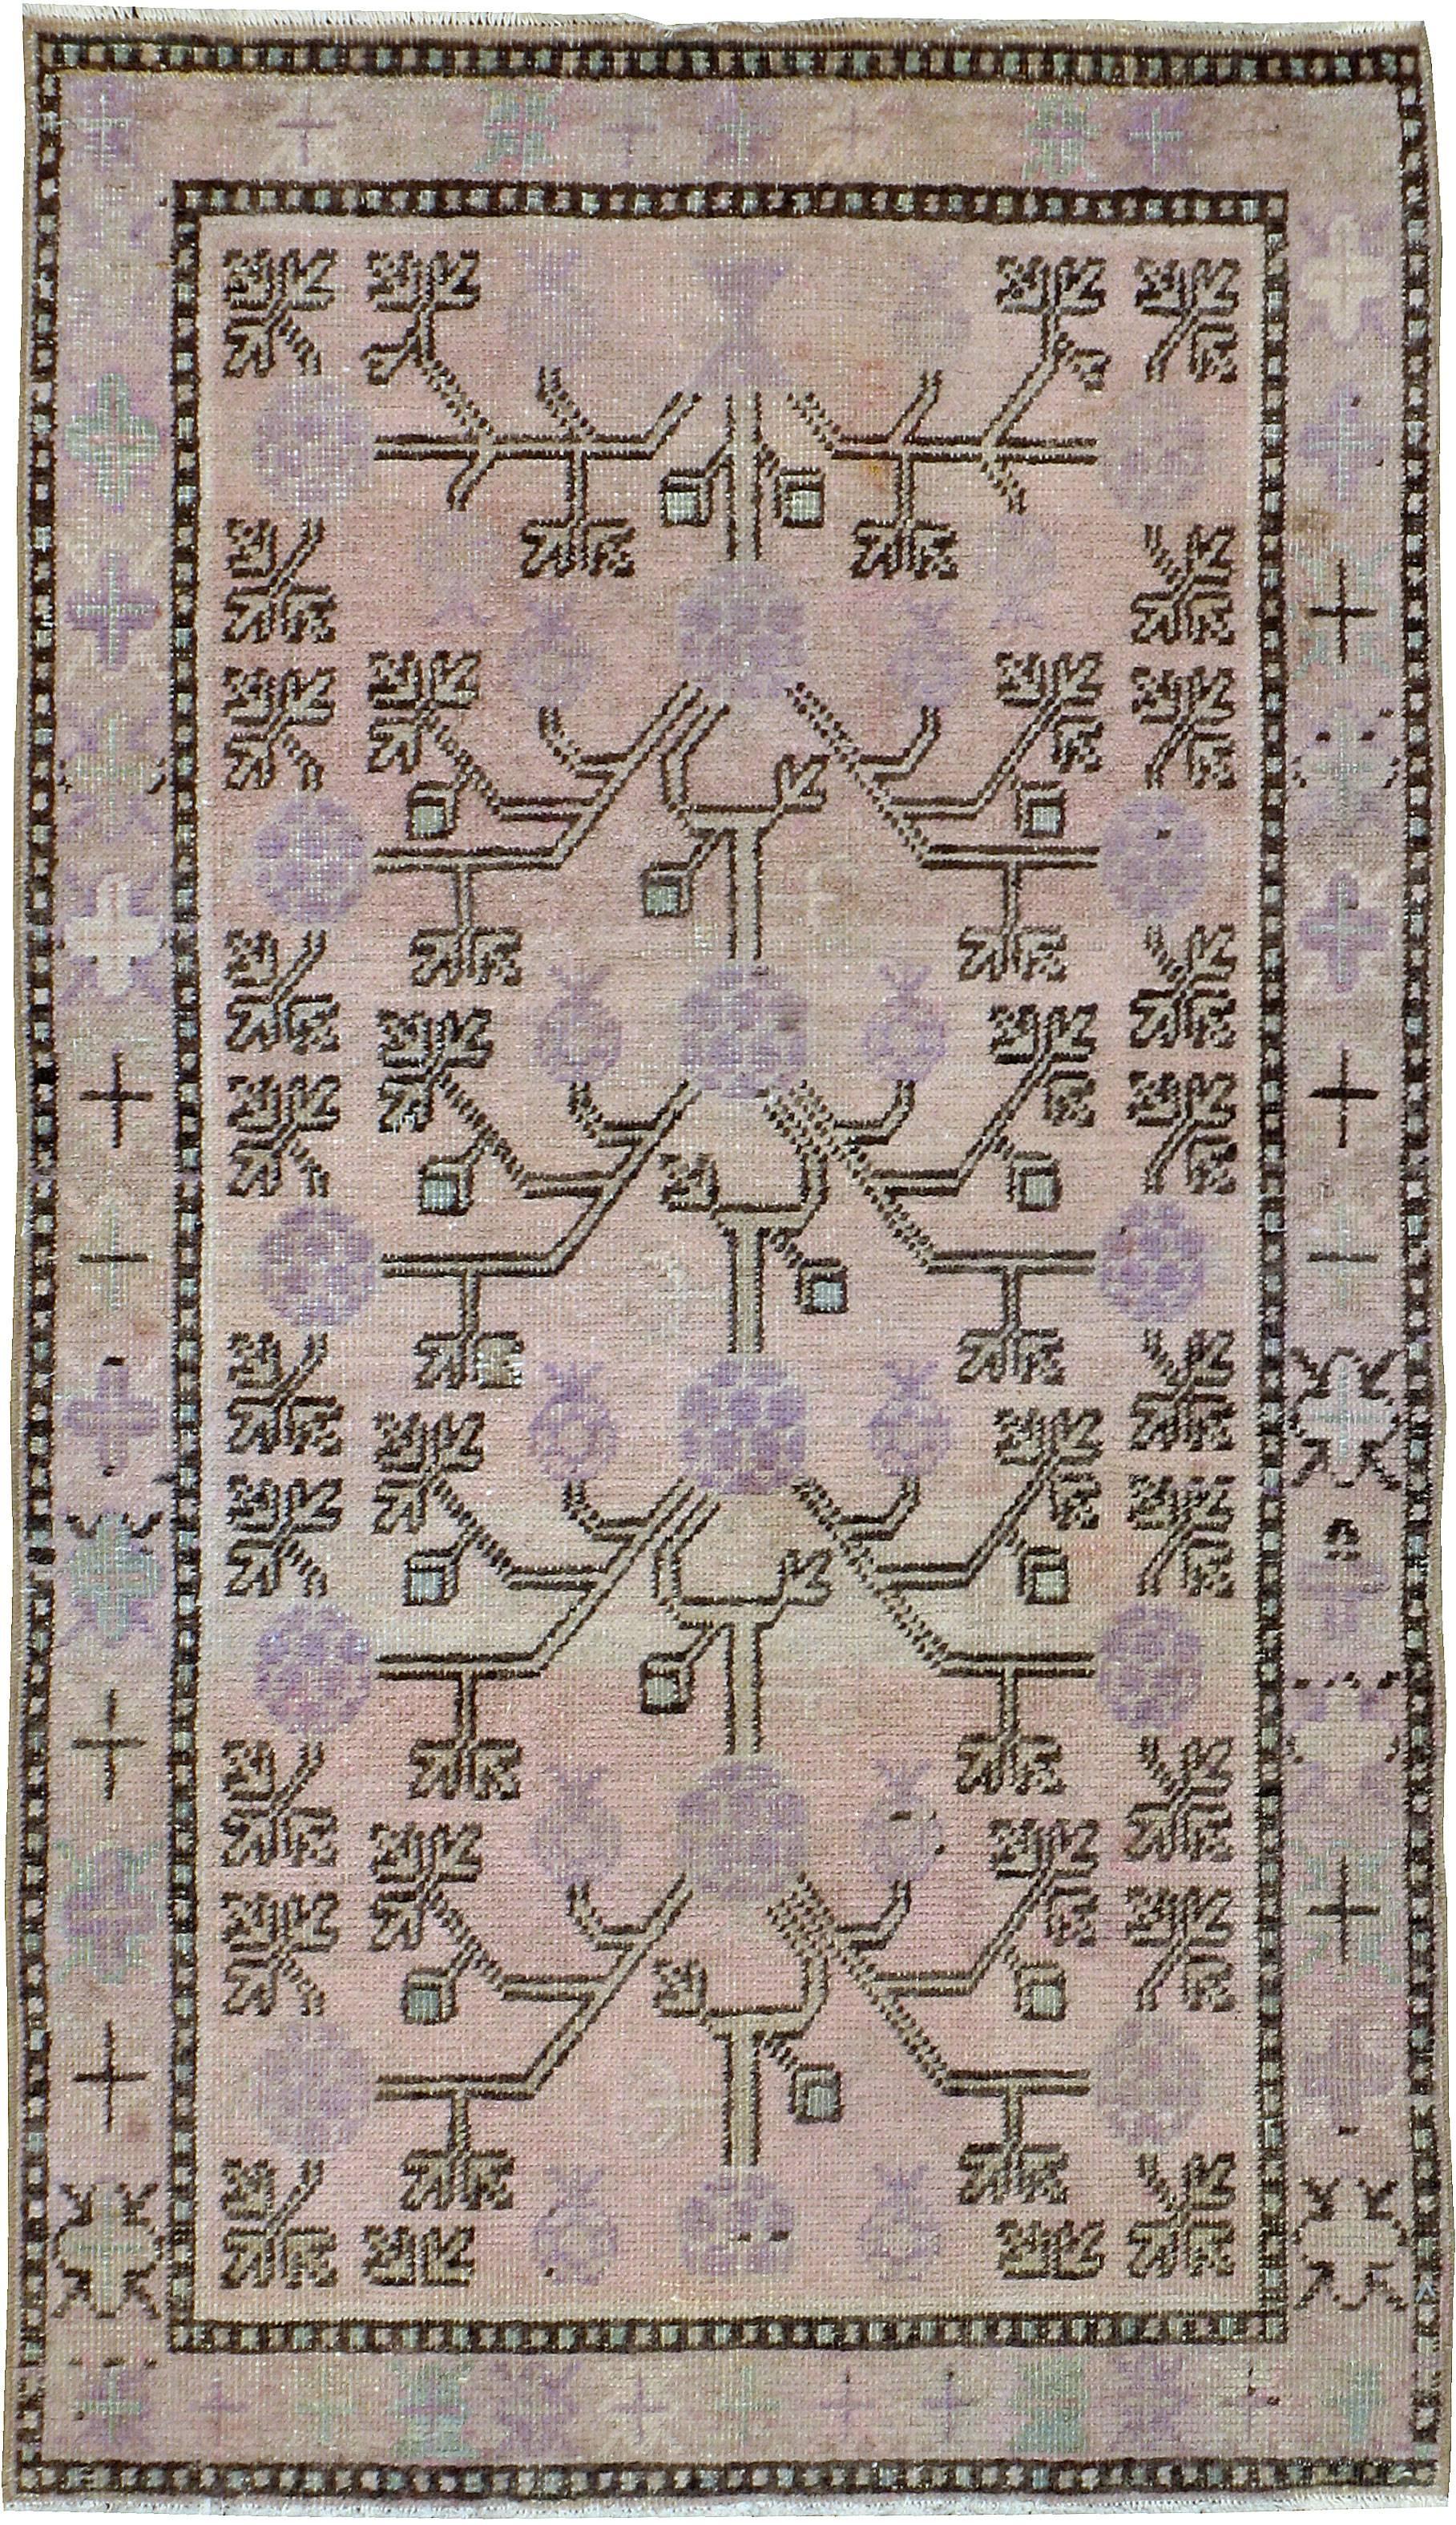 An antique East Turkestan Khotan carpet from the first quarter of the 20th century with a pomegranate design in shades of pink and purple.